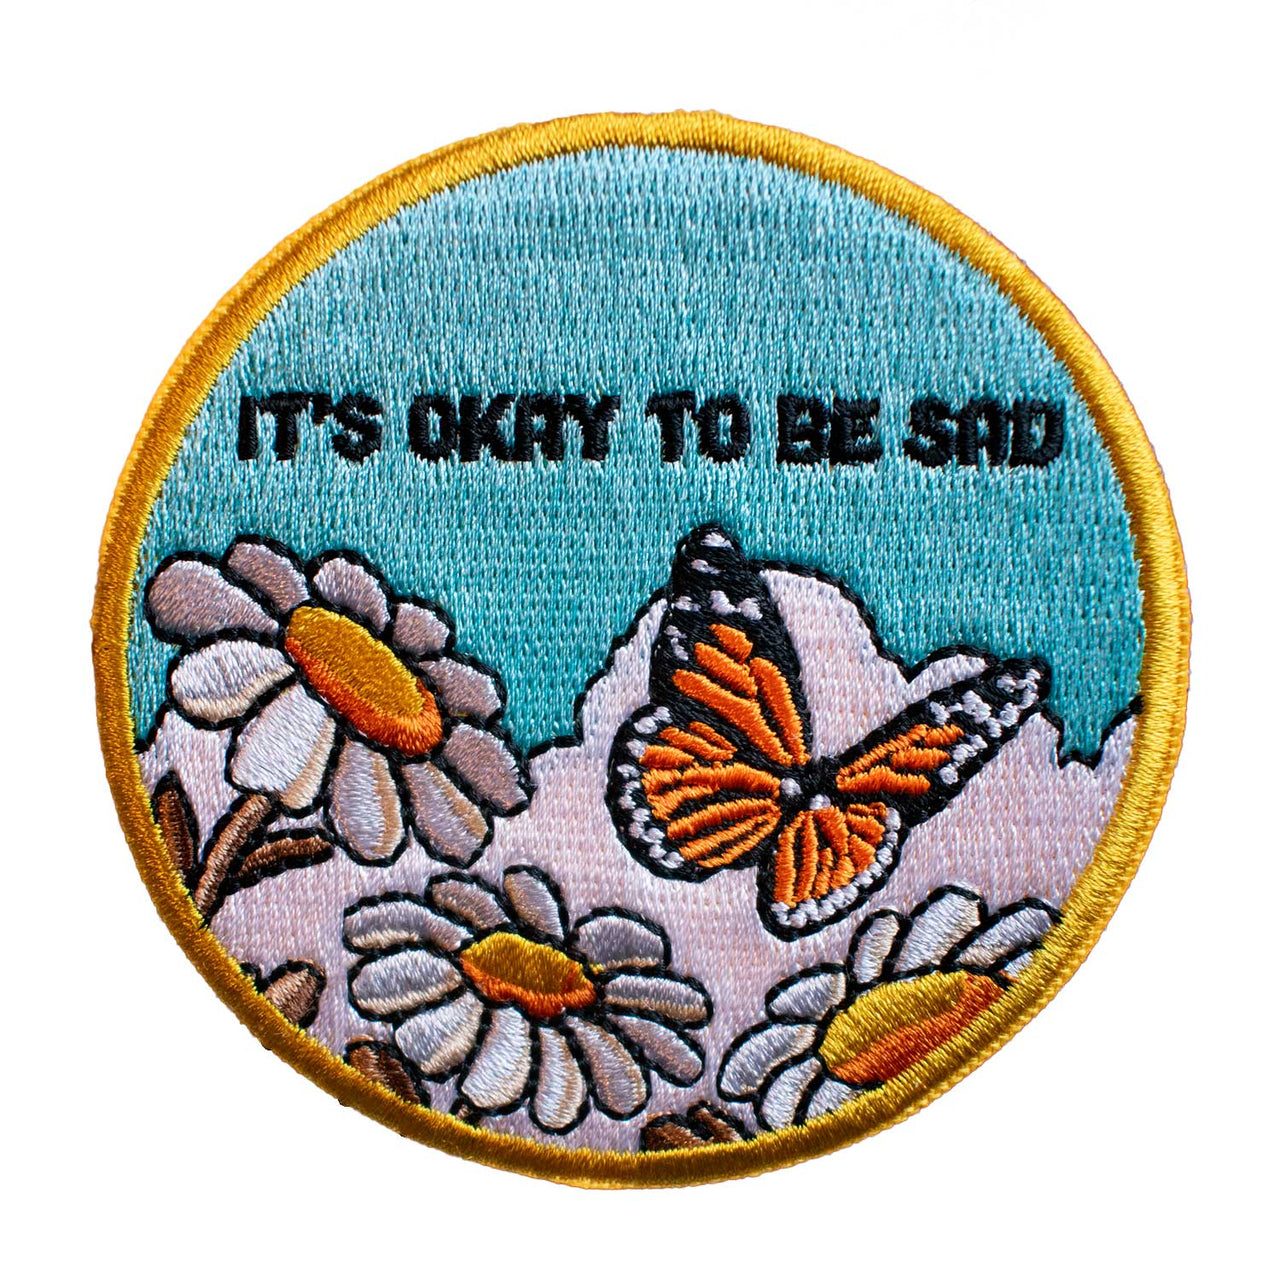 It's Okay To Be Sad Embroidered Patch